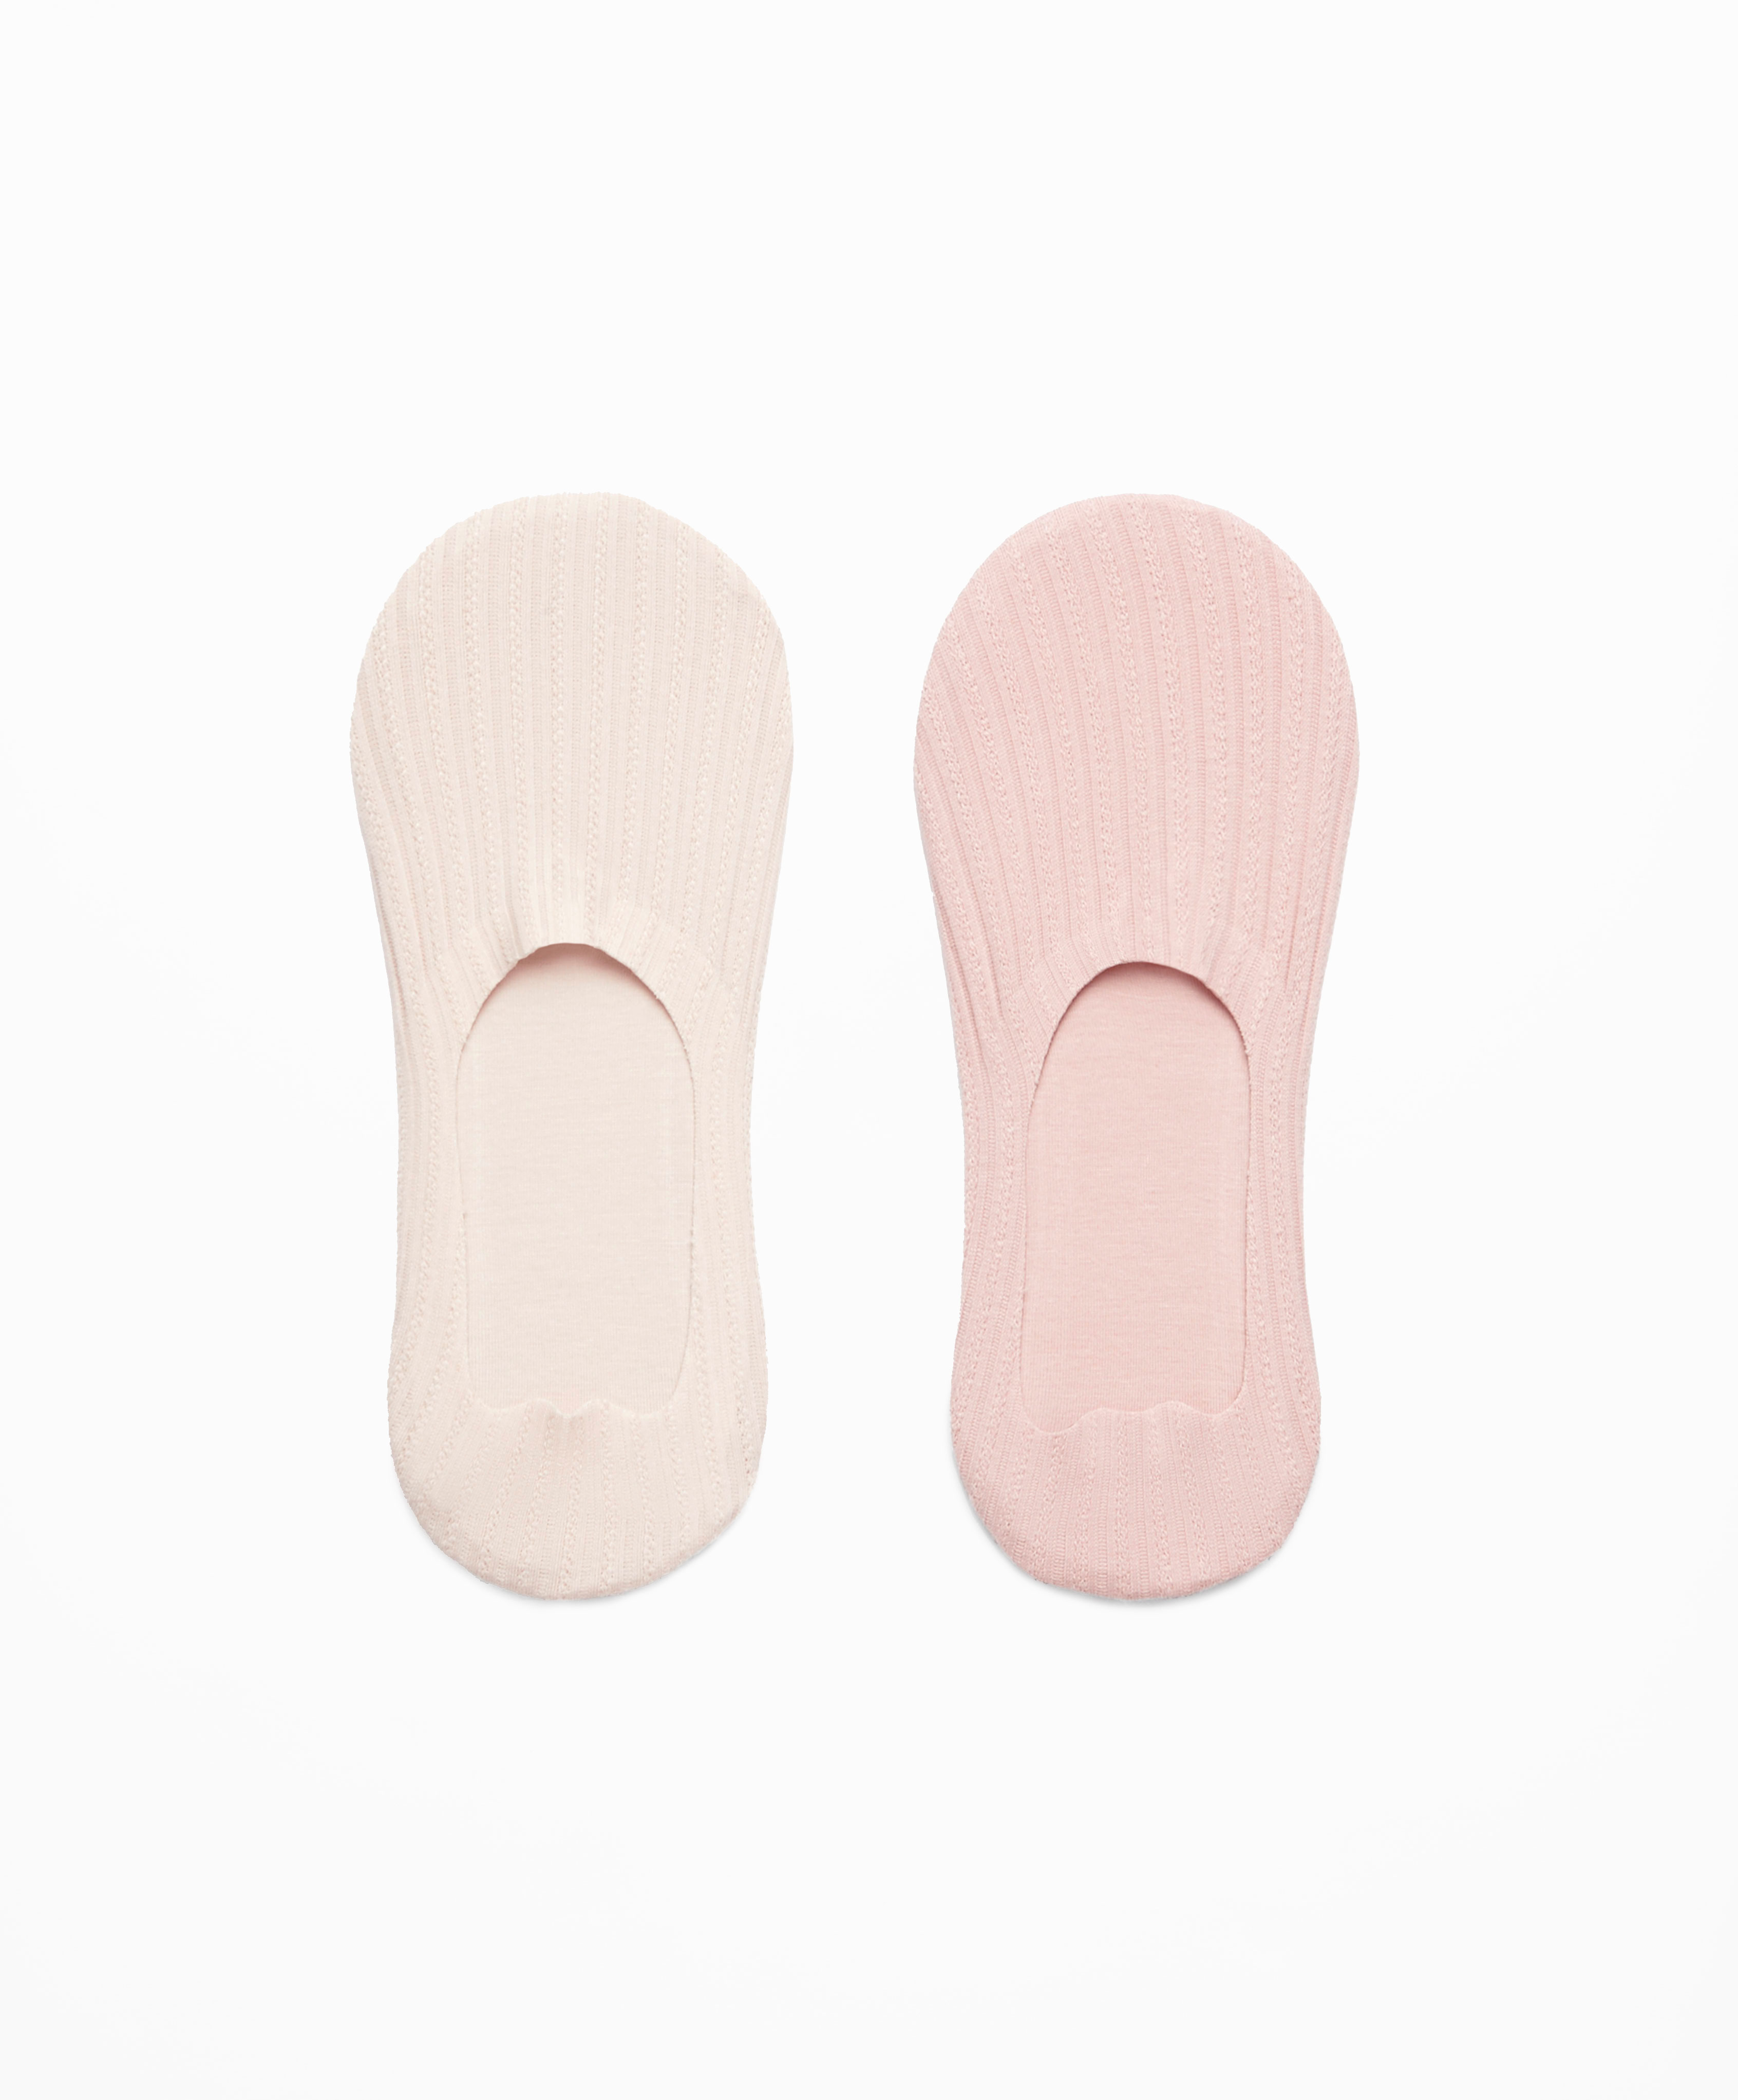 2 pairs of high-cut cotton blend invisible socks